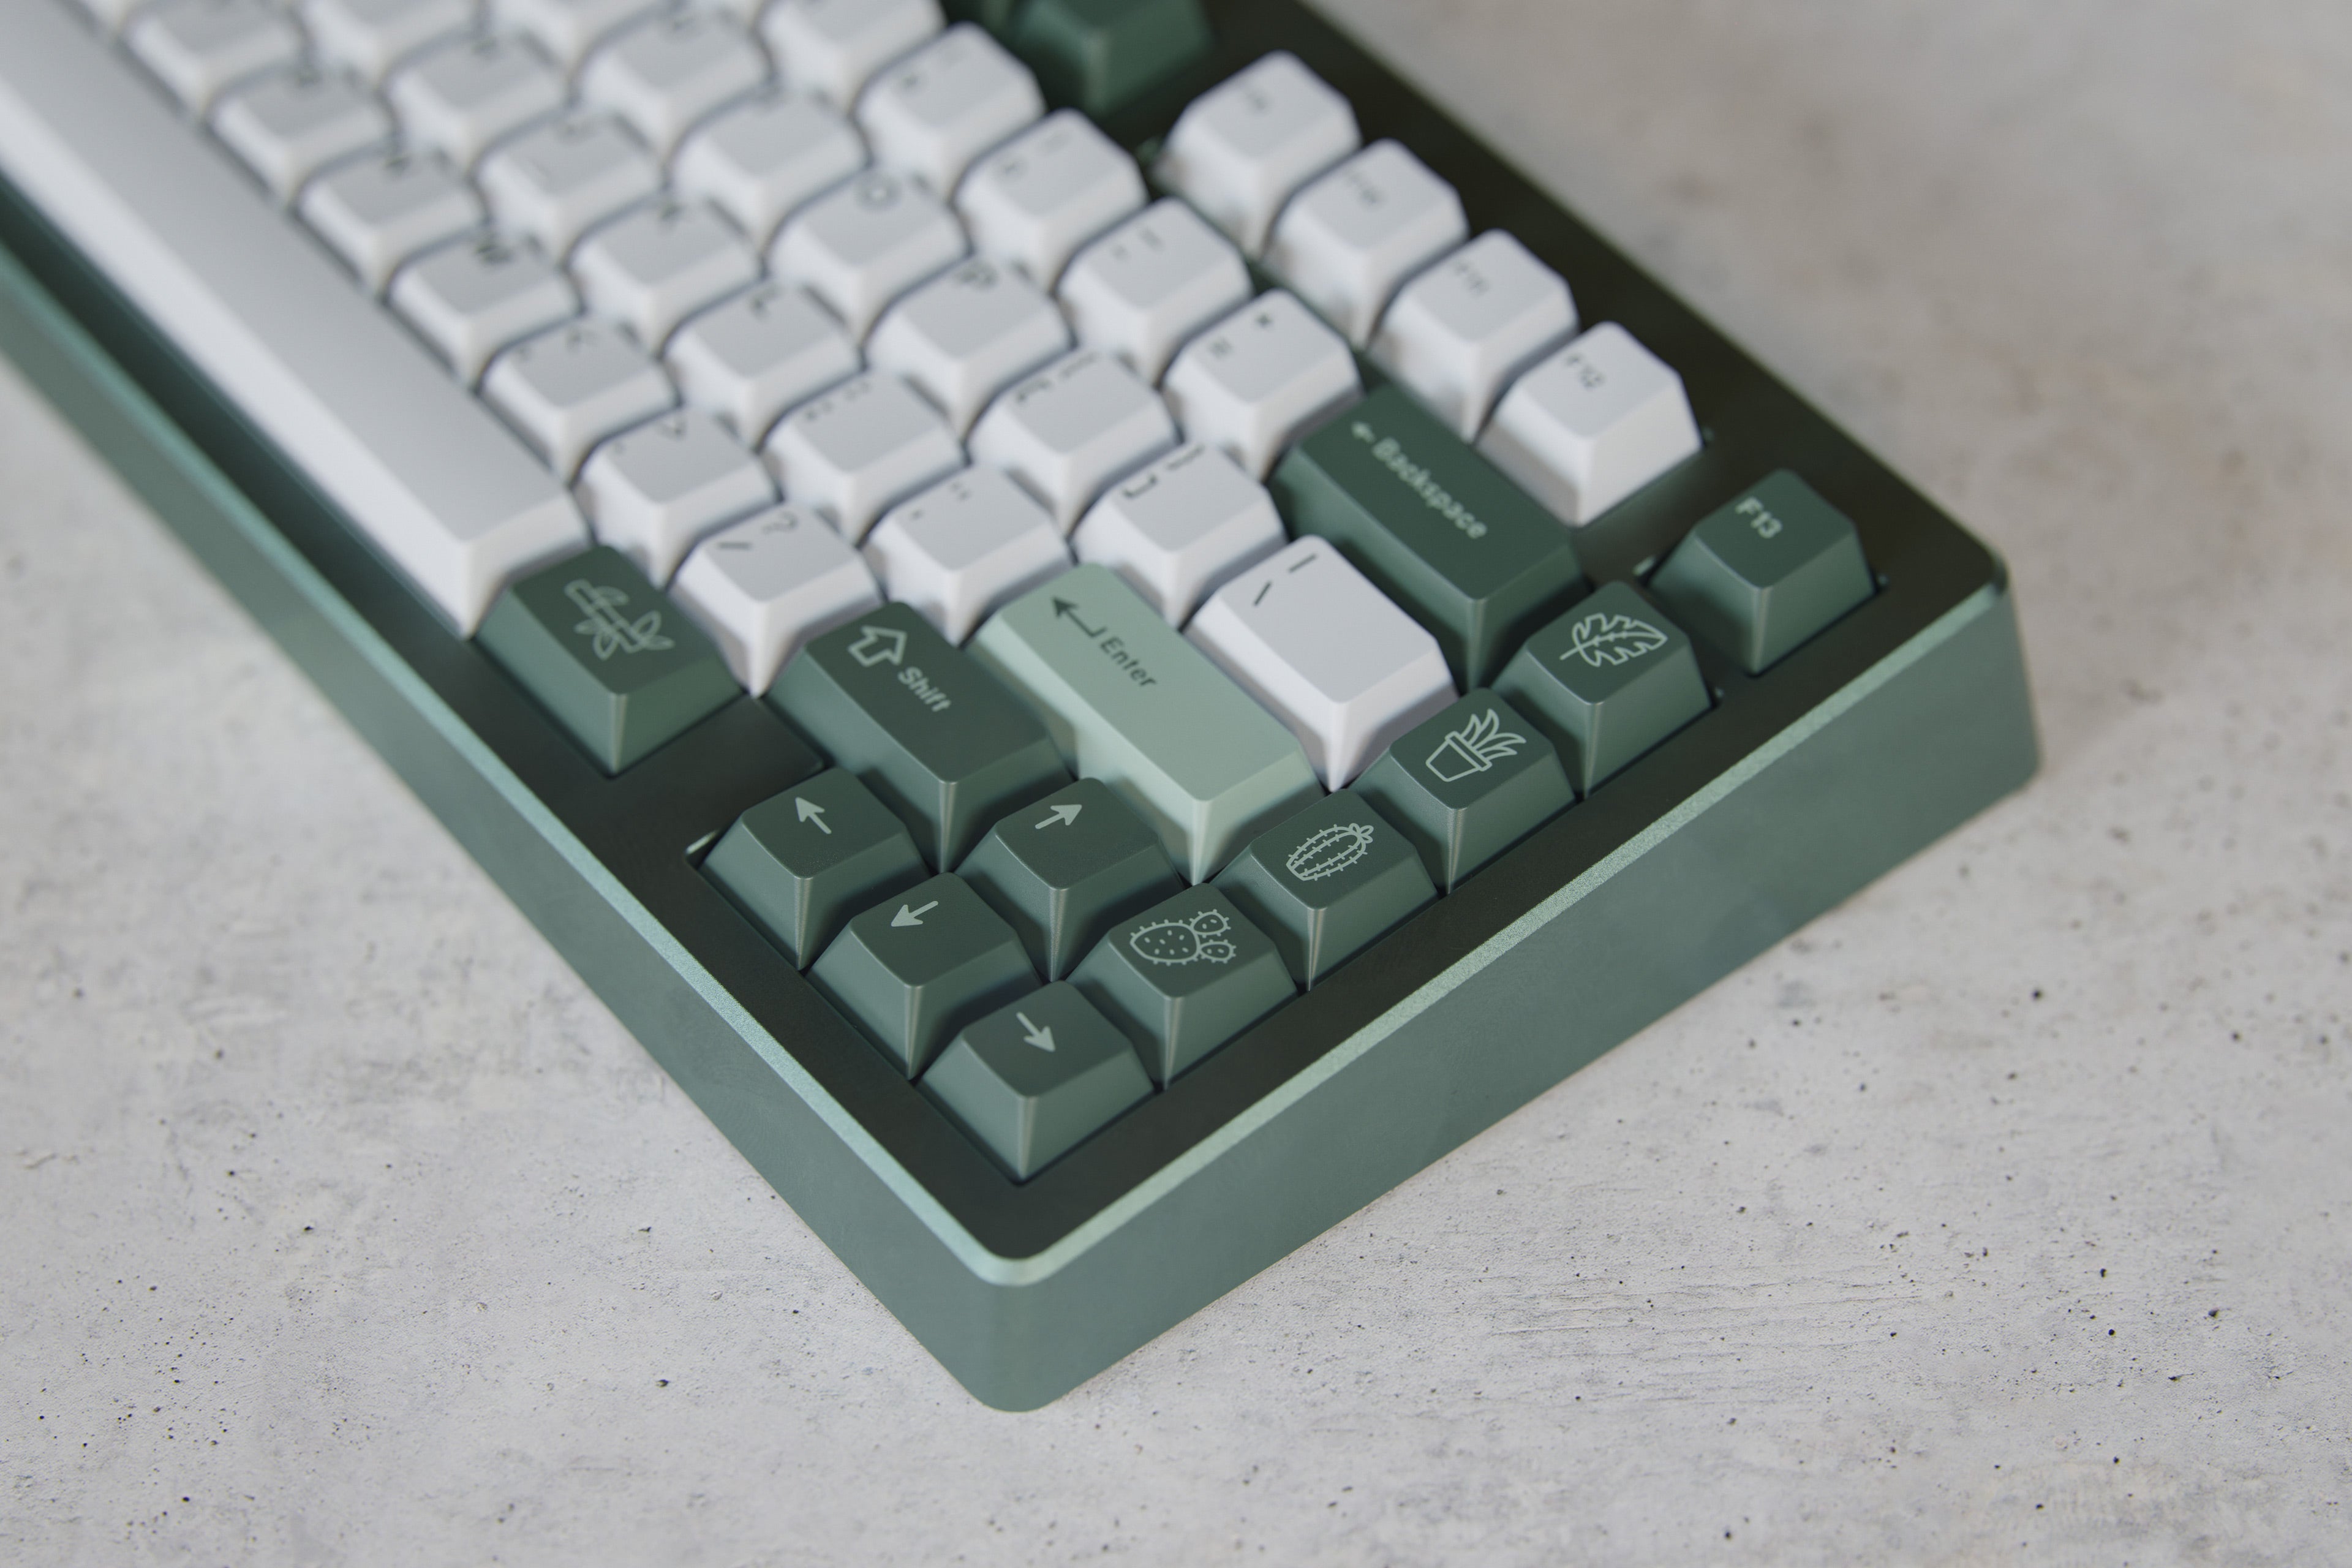 [In Stock] GMK CYL Botanical 2